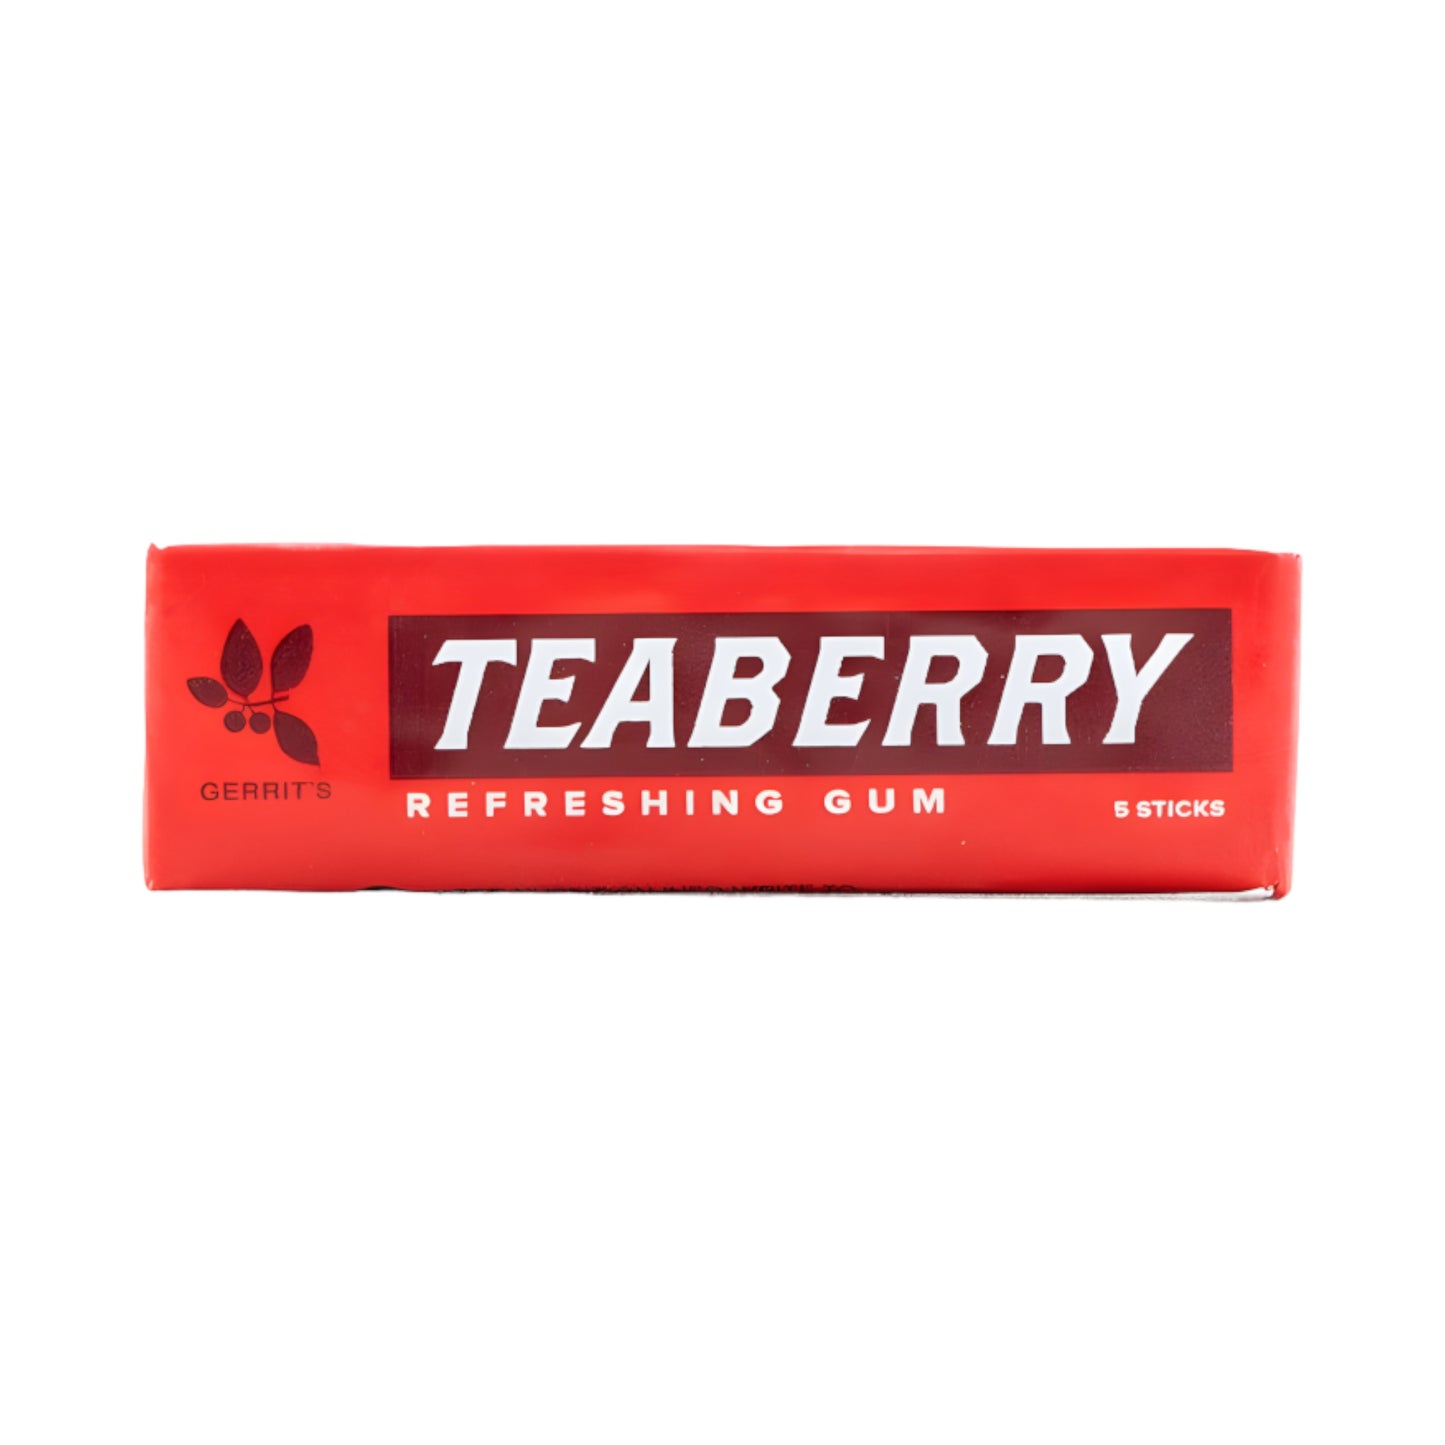 Gerrits Teaberry Chewing Gum - 5 Piece